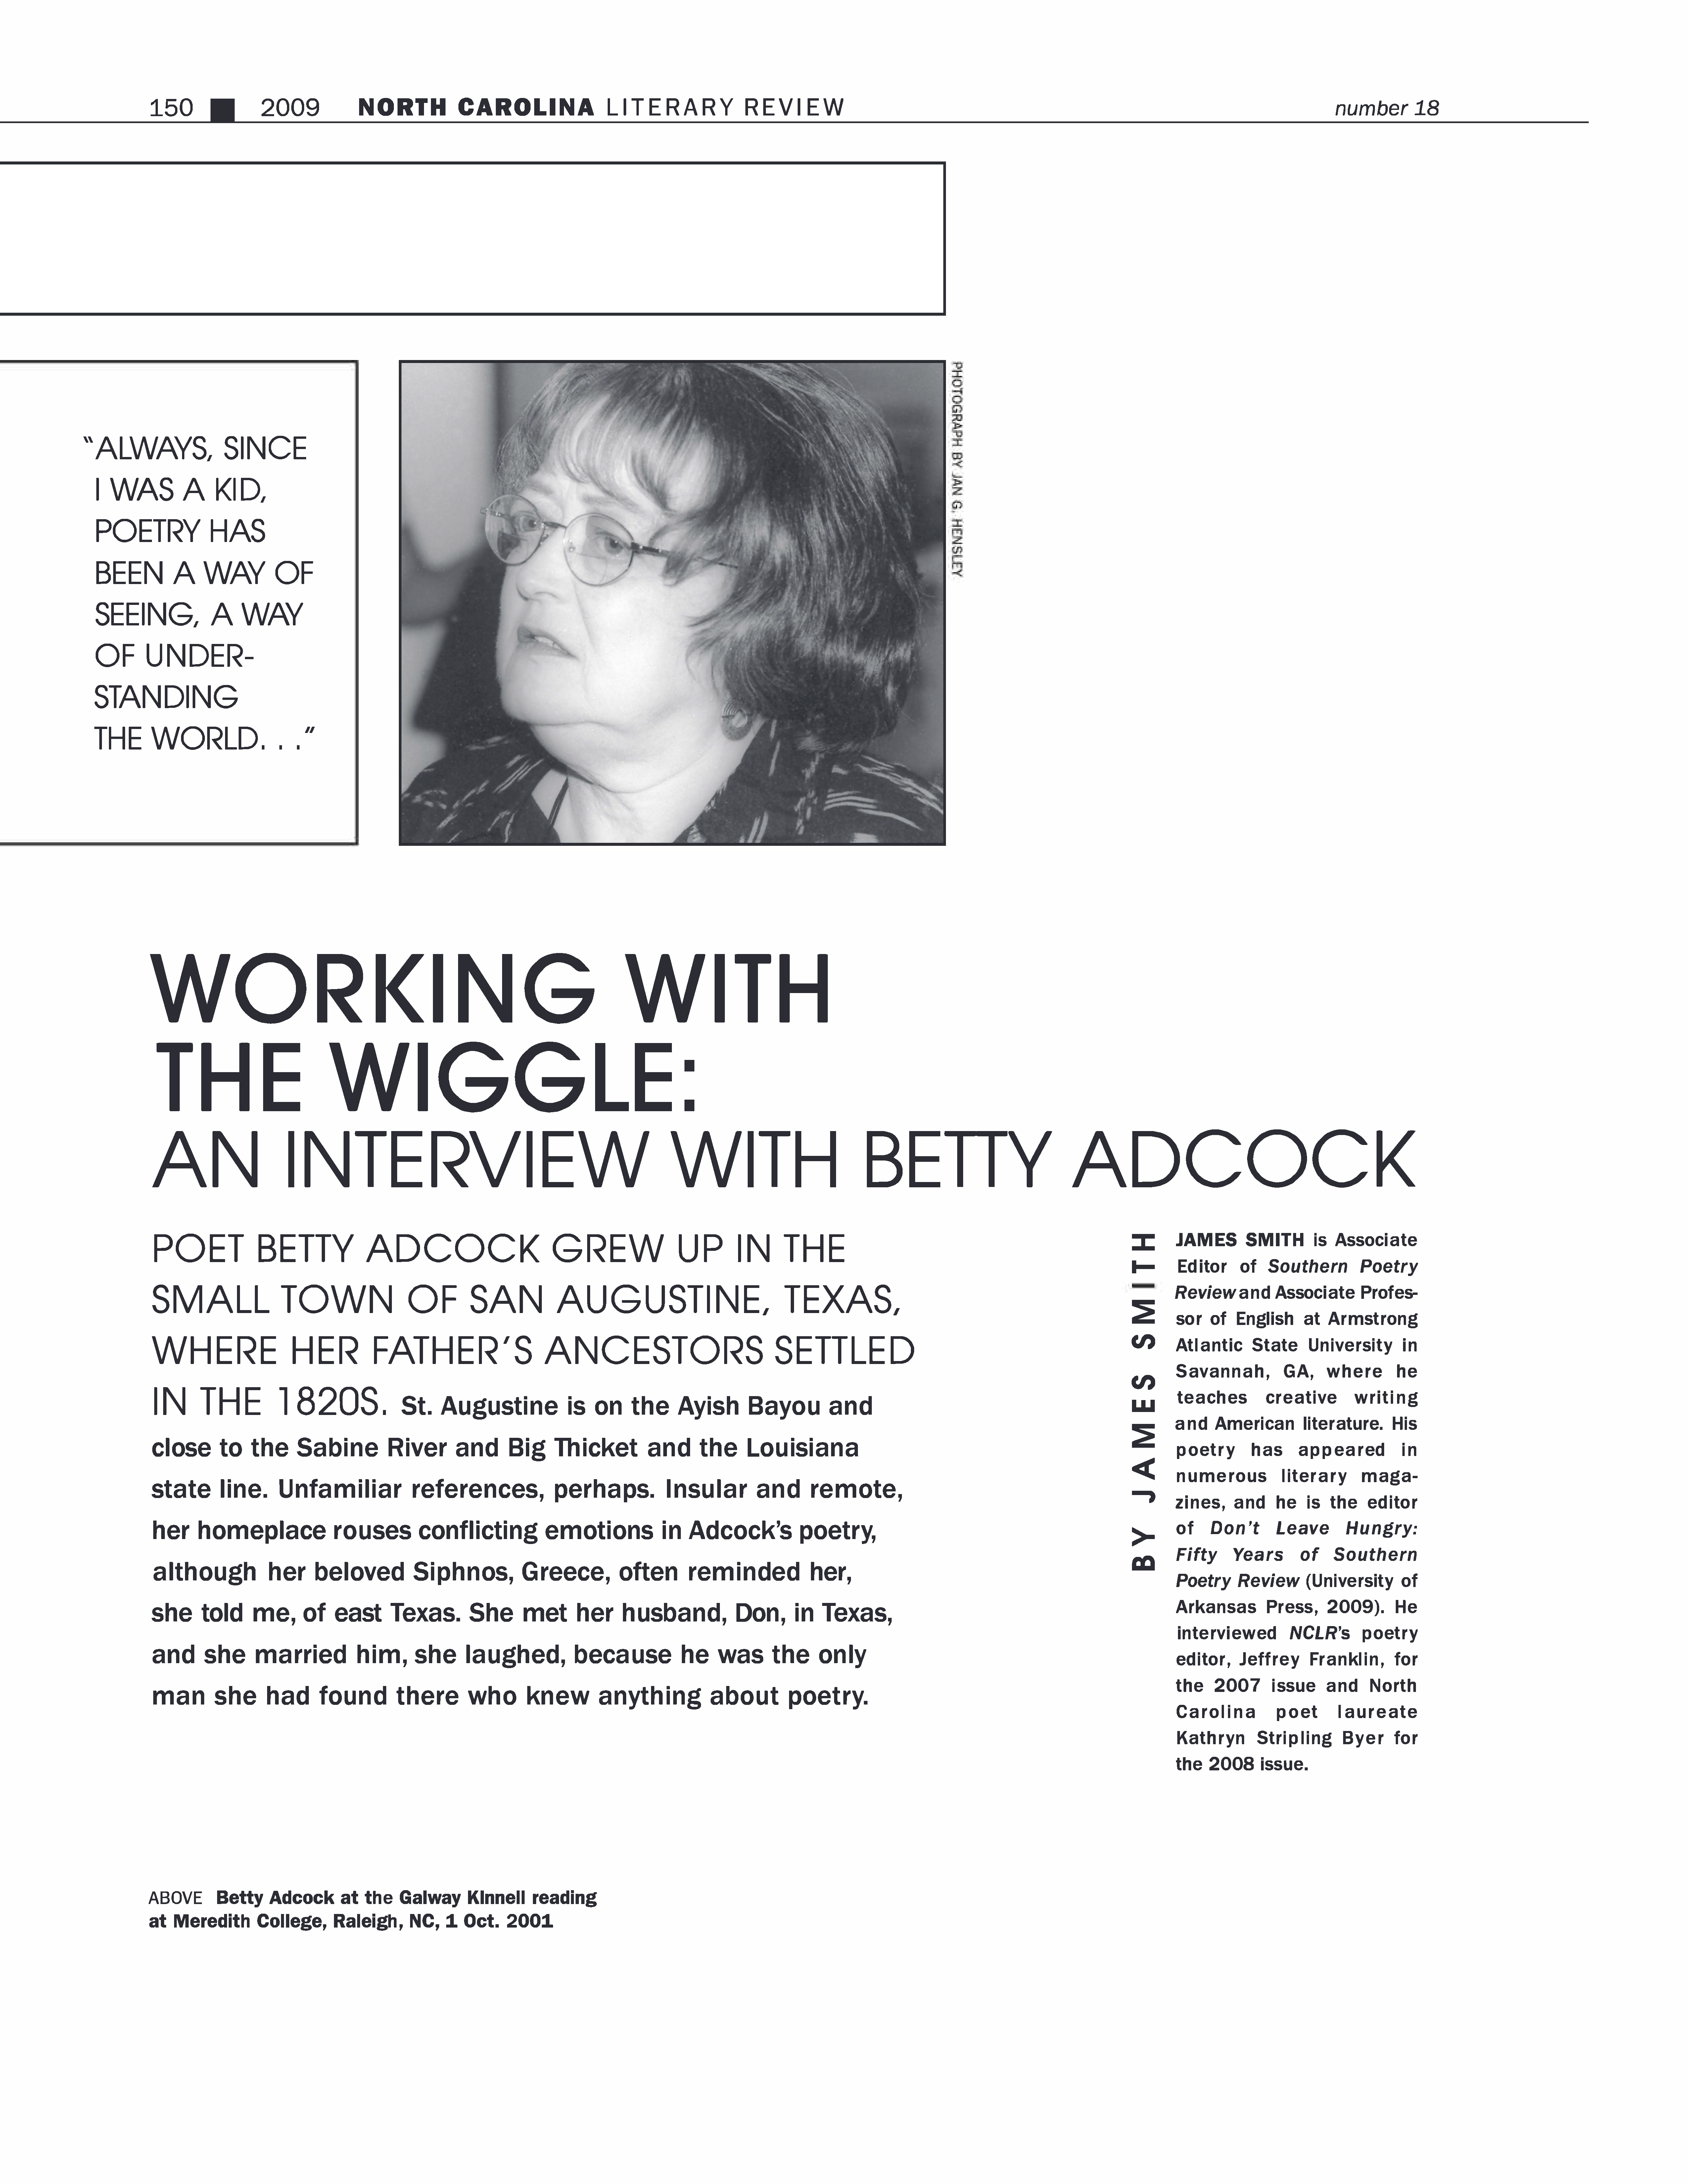 The Sensibility of Poet Betty Adcock